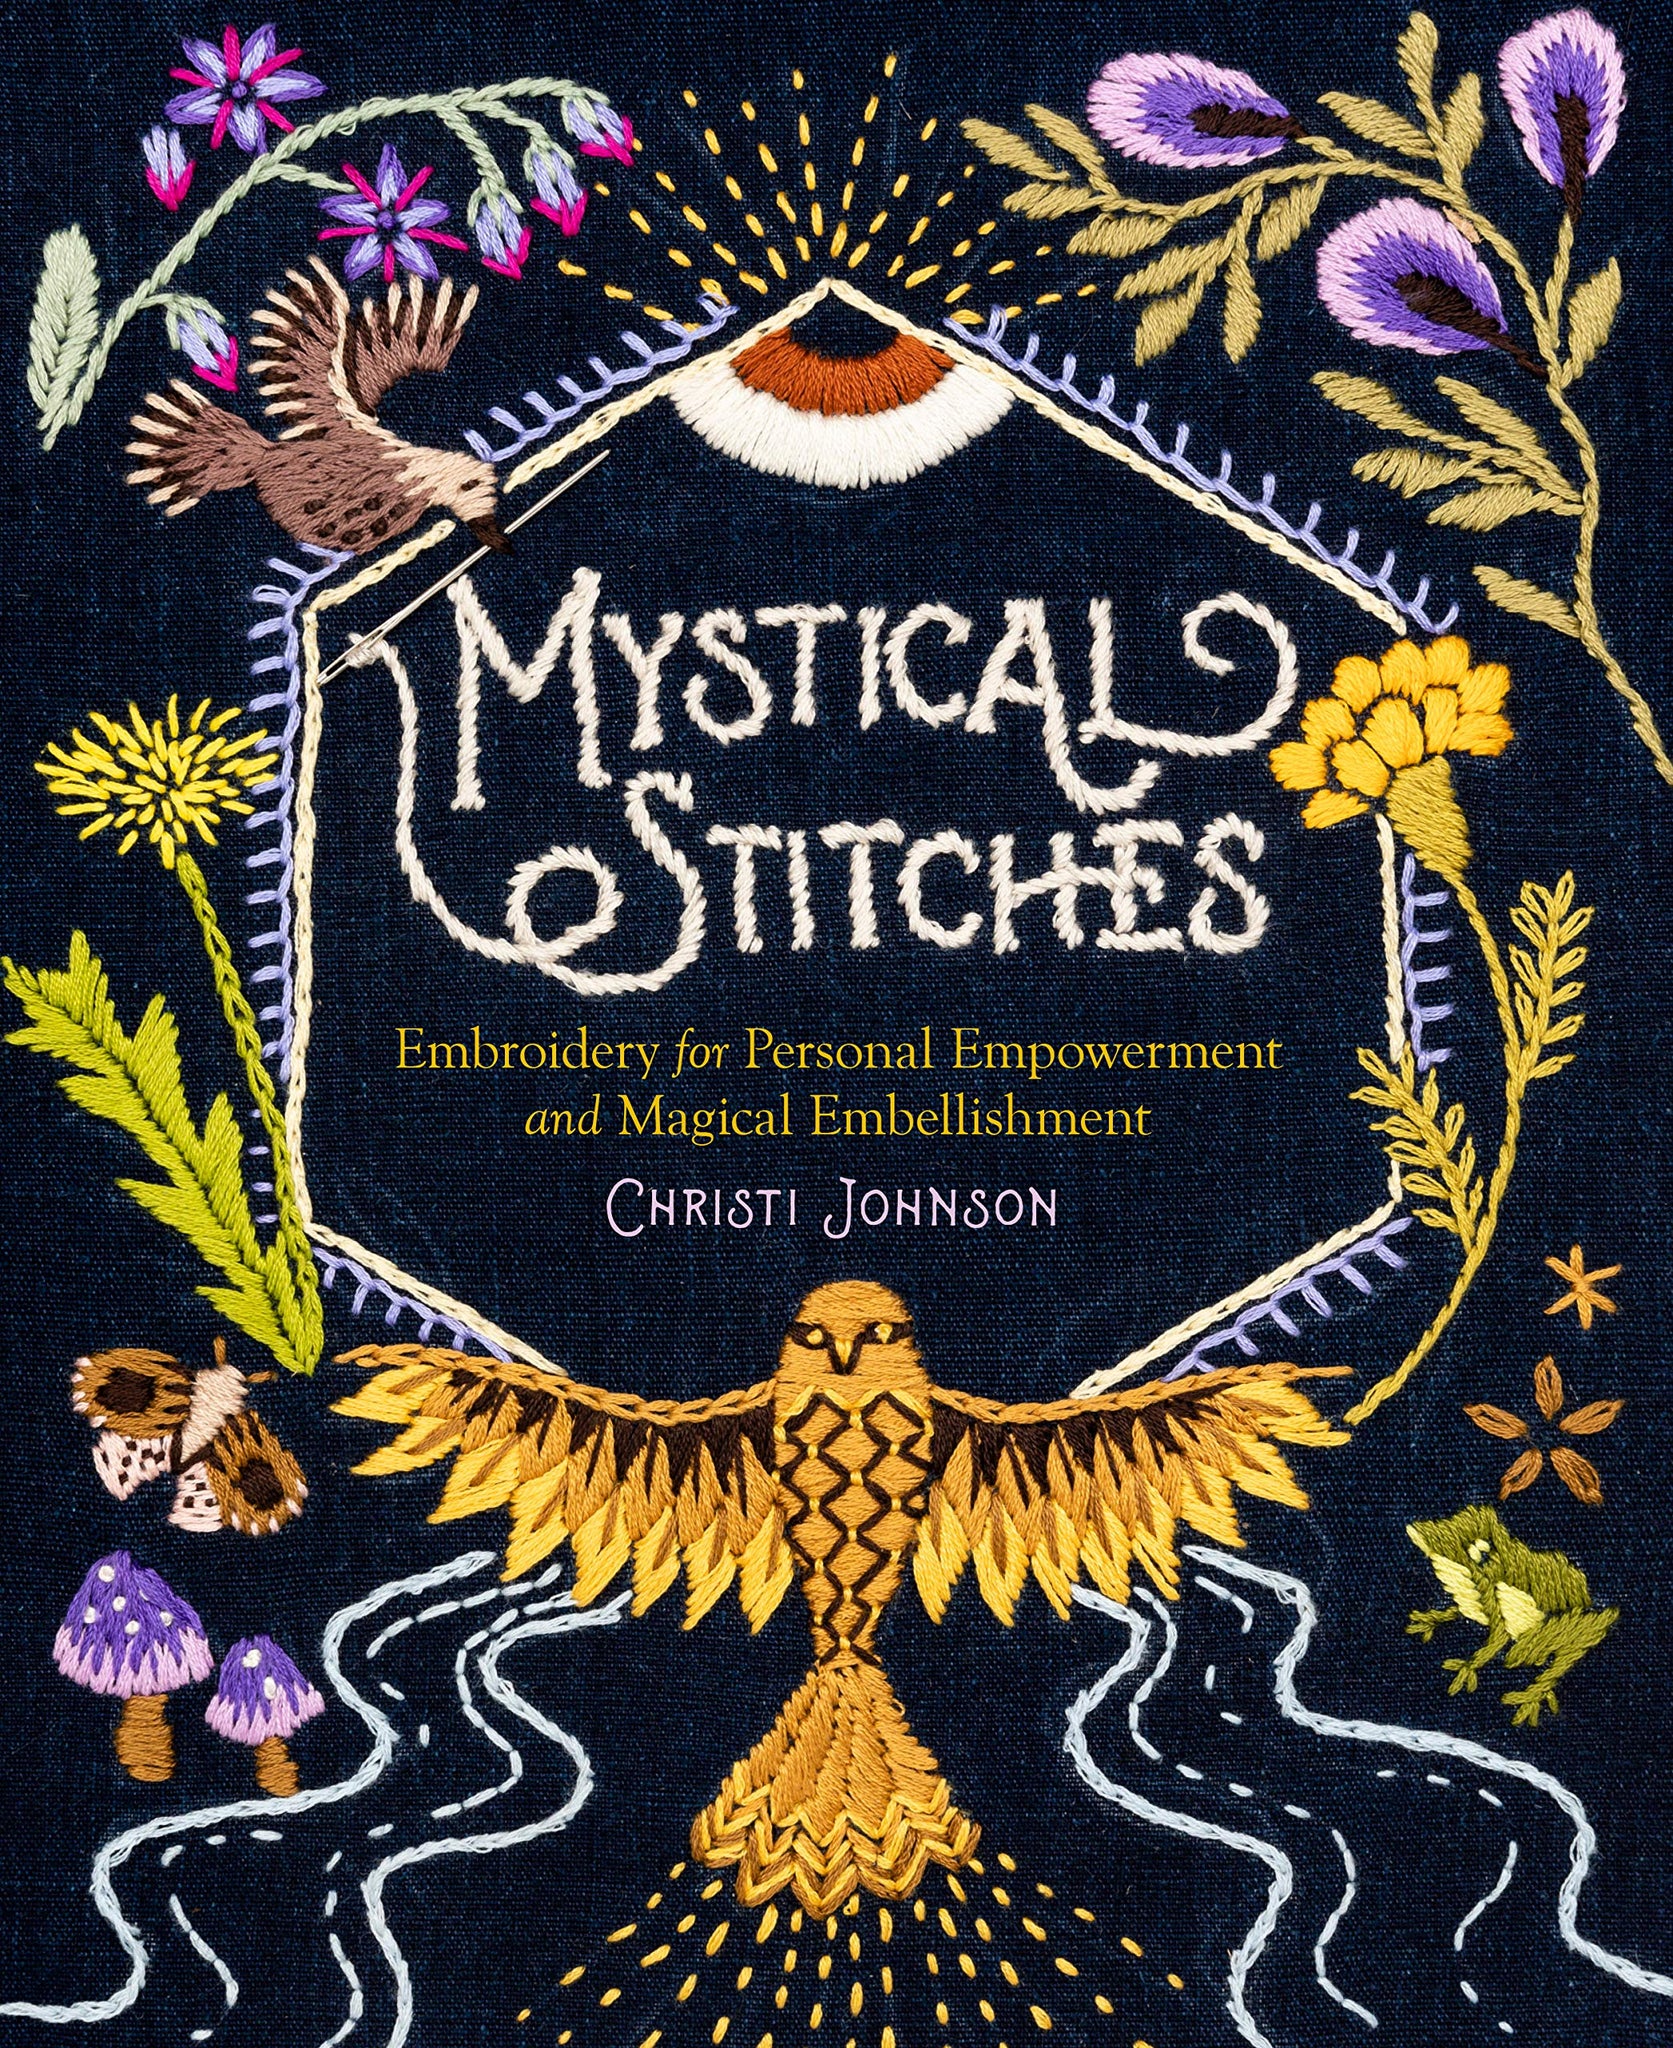 Mystical Stitches: Embroidery for Personal Empowerment & Magical Embellishment by Christi Johnson - hardcvr